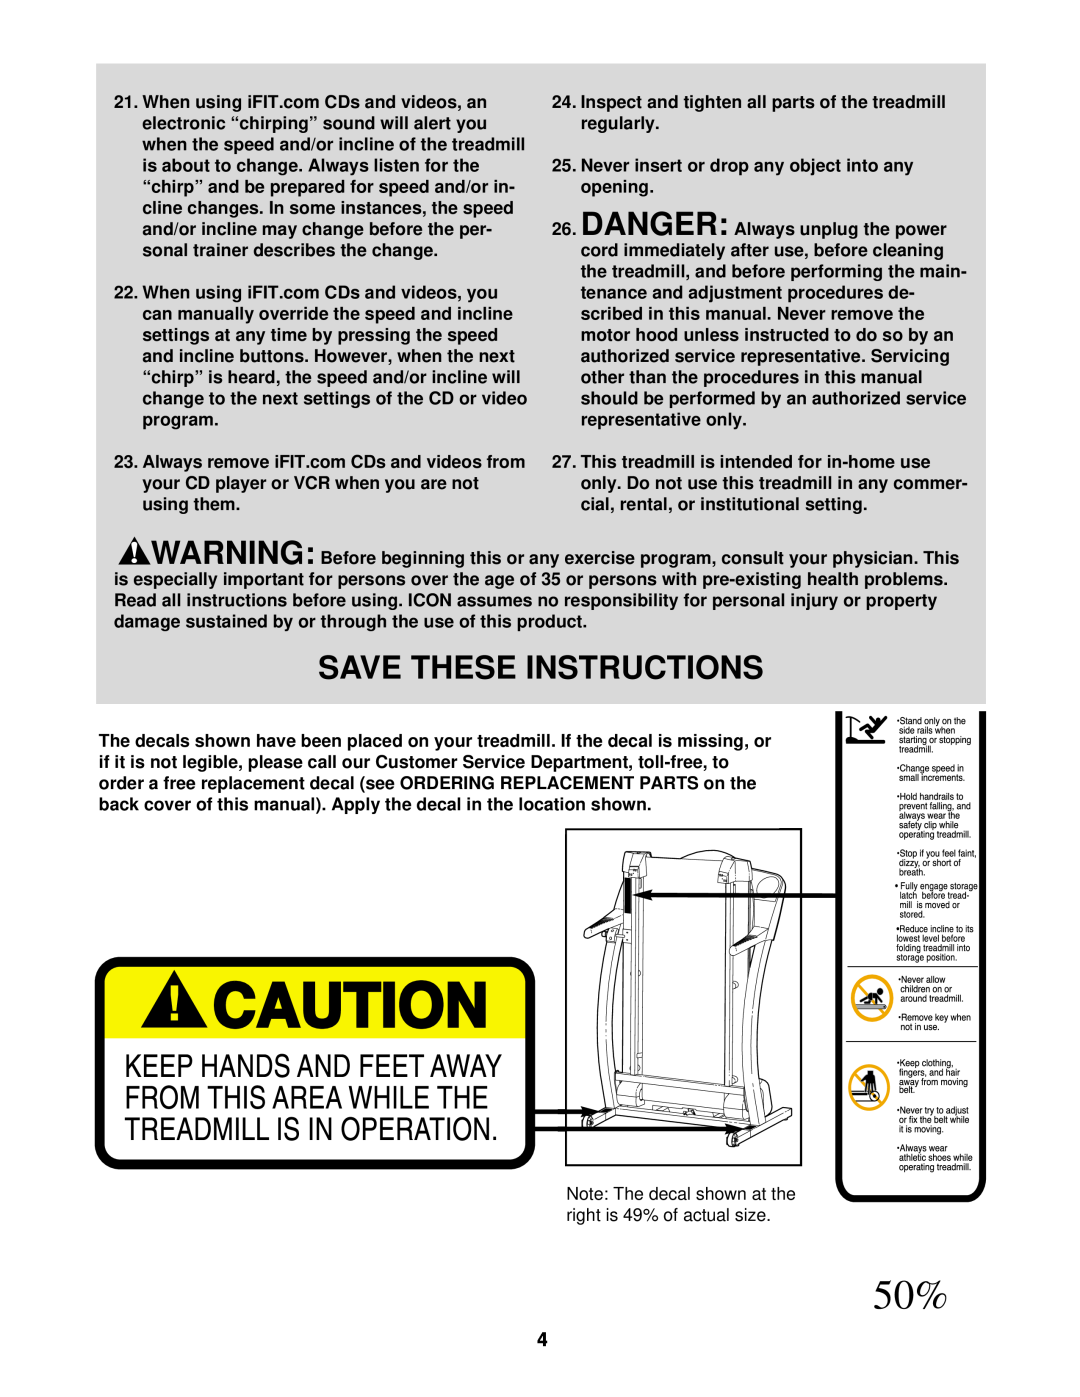 ProForm PFTL69211 user manual Save These Instructions, Inspect and tighten all parts of the treadmill regularly 